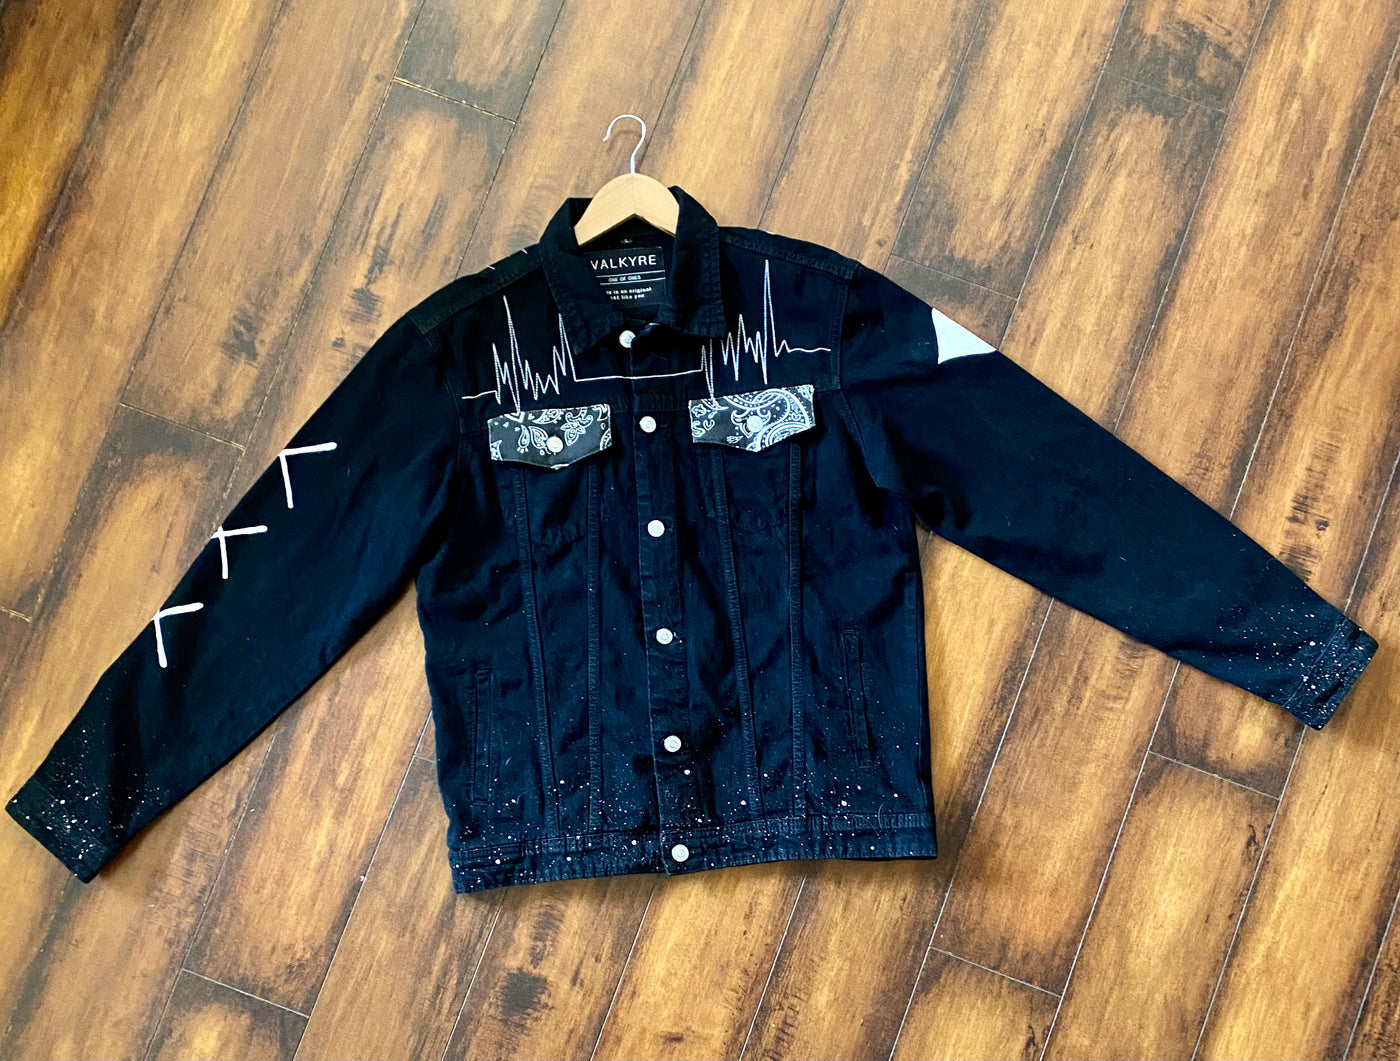 'ONE LIFE ONE CHANCE' VALKYRE JACKET